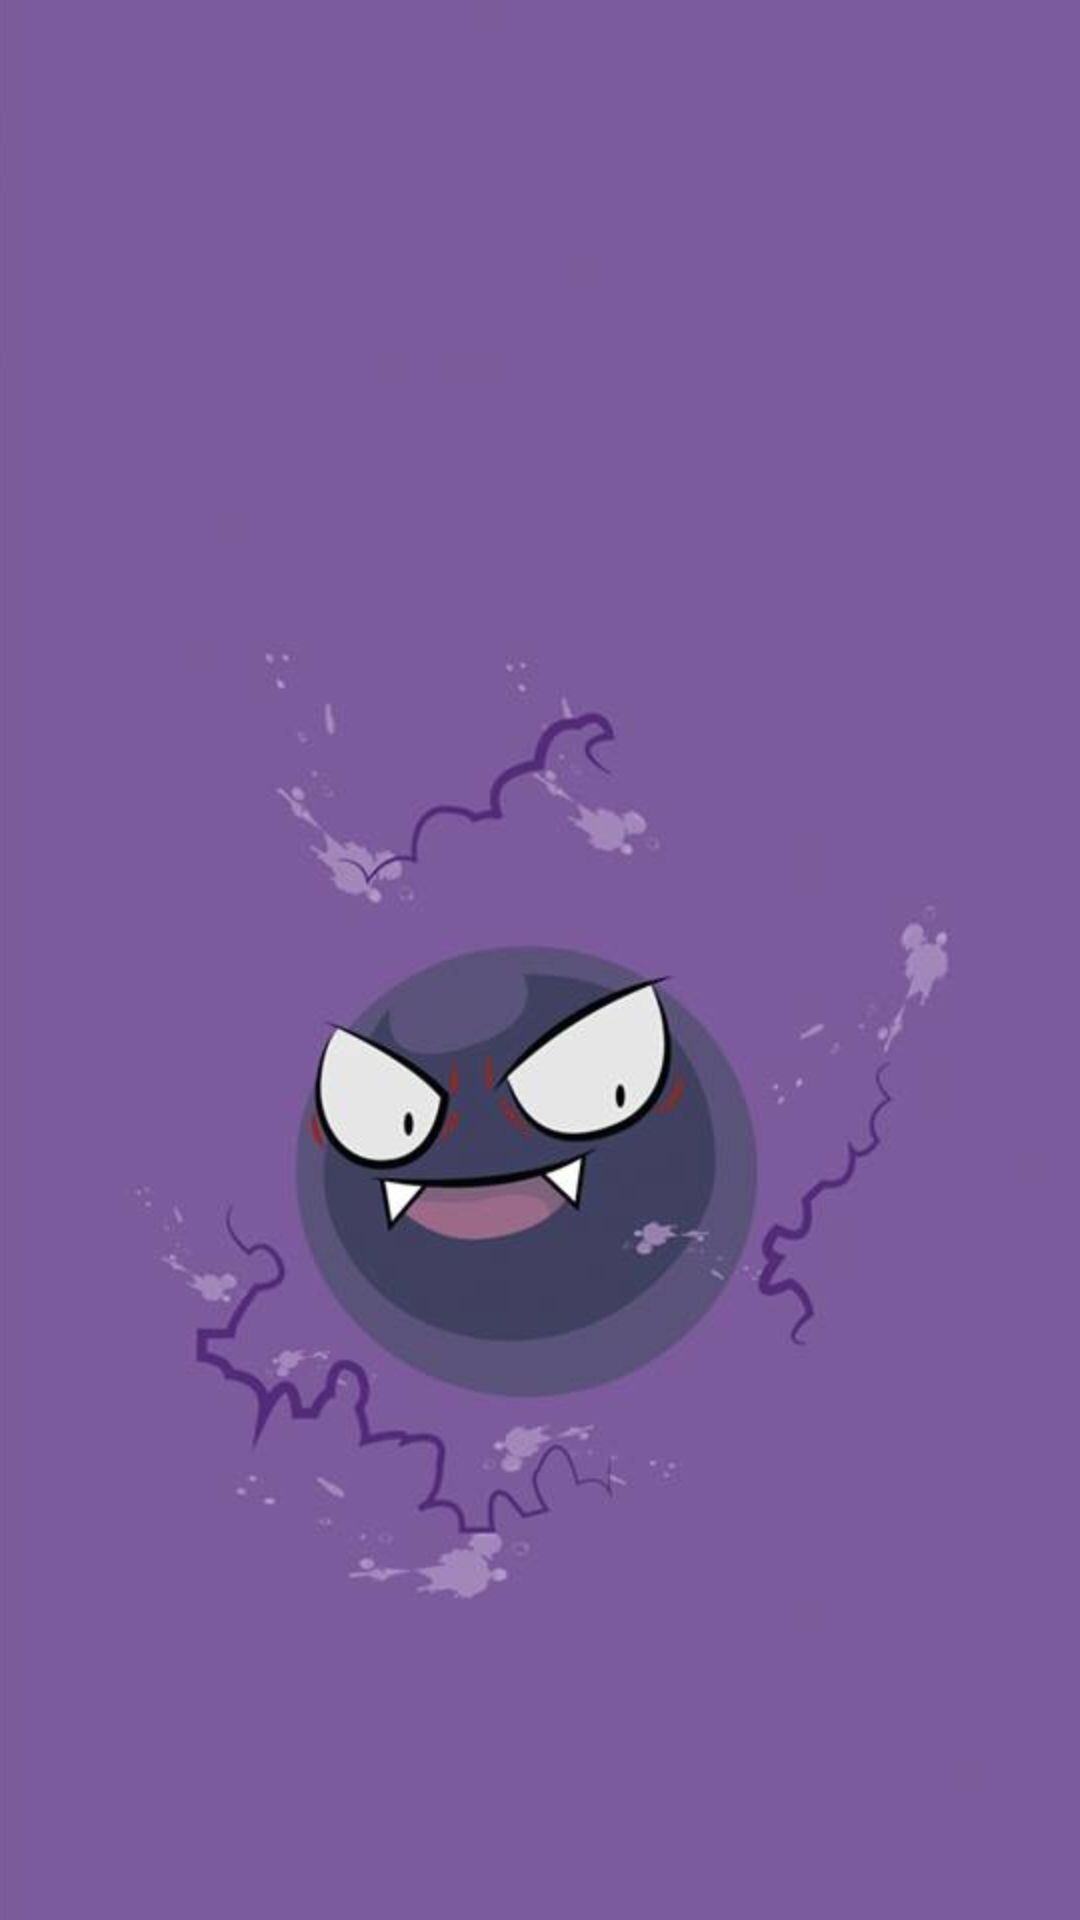 Gastly Pokmon wallpapers, Playful spirits, Ghostly apparitions, Mischievous creatures, 1080x1920 Full HD Phone